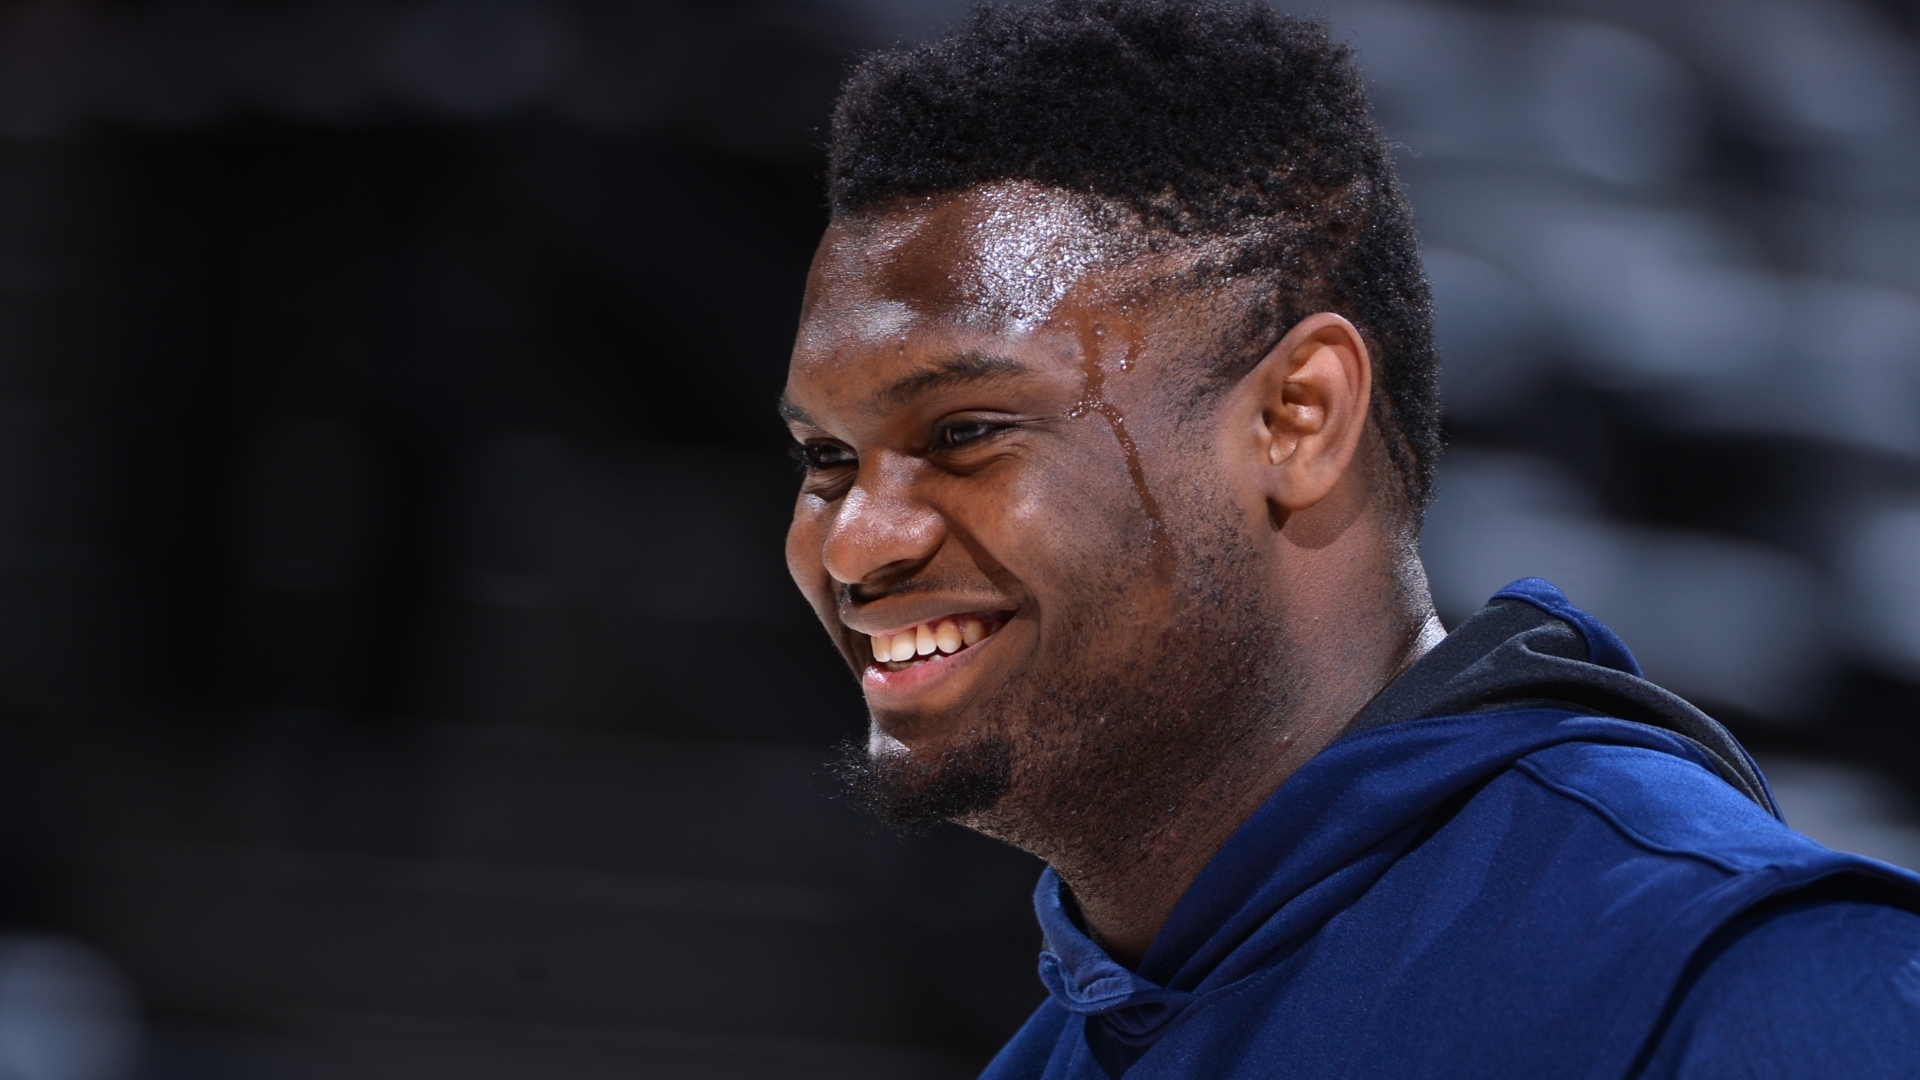 Should the Pelicans trade Zion to the Knicks?